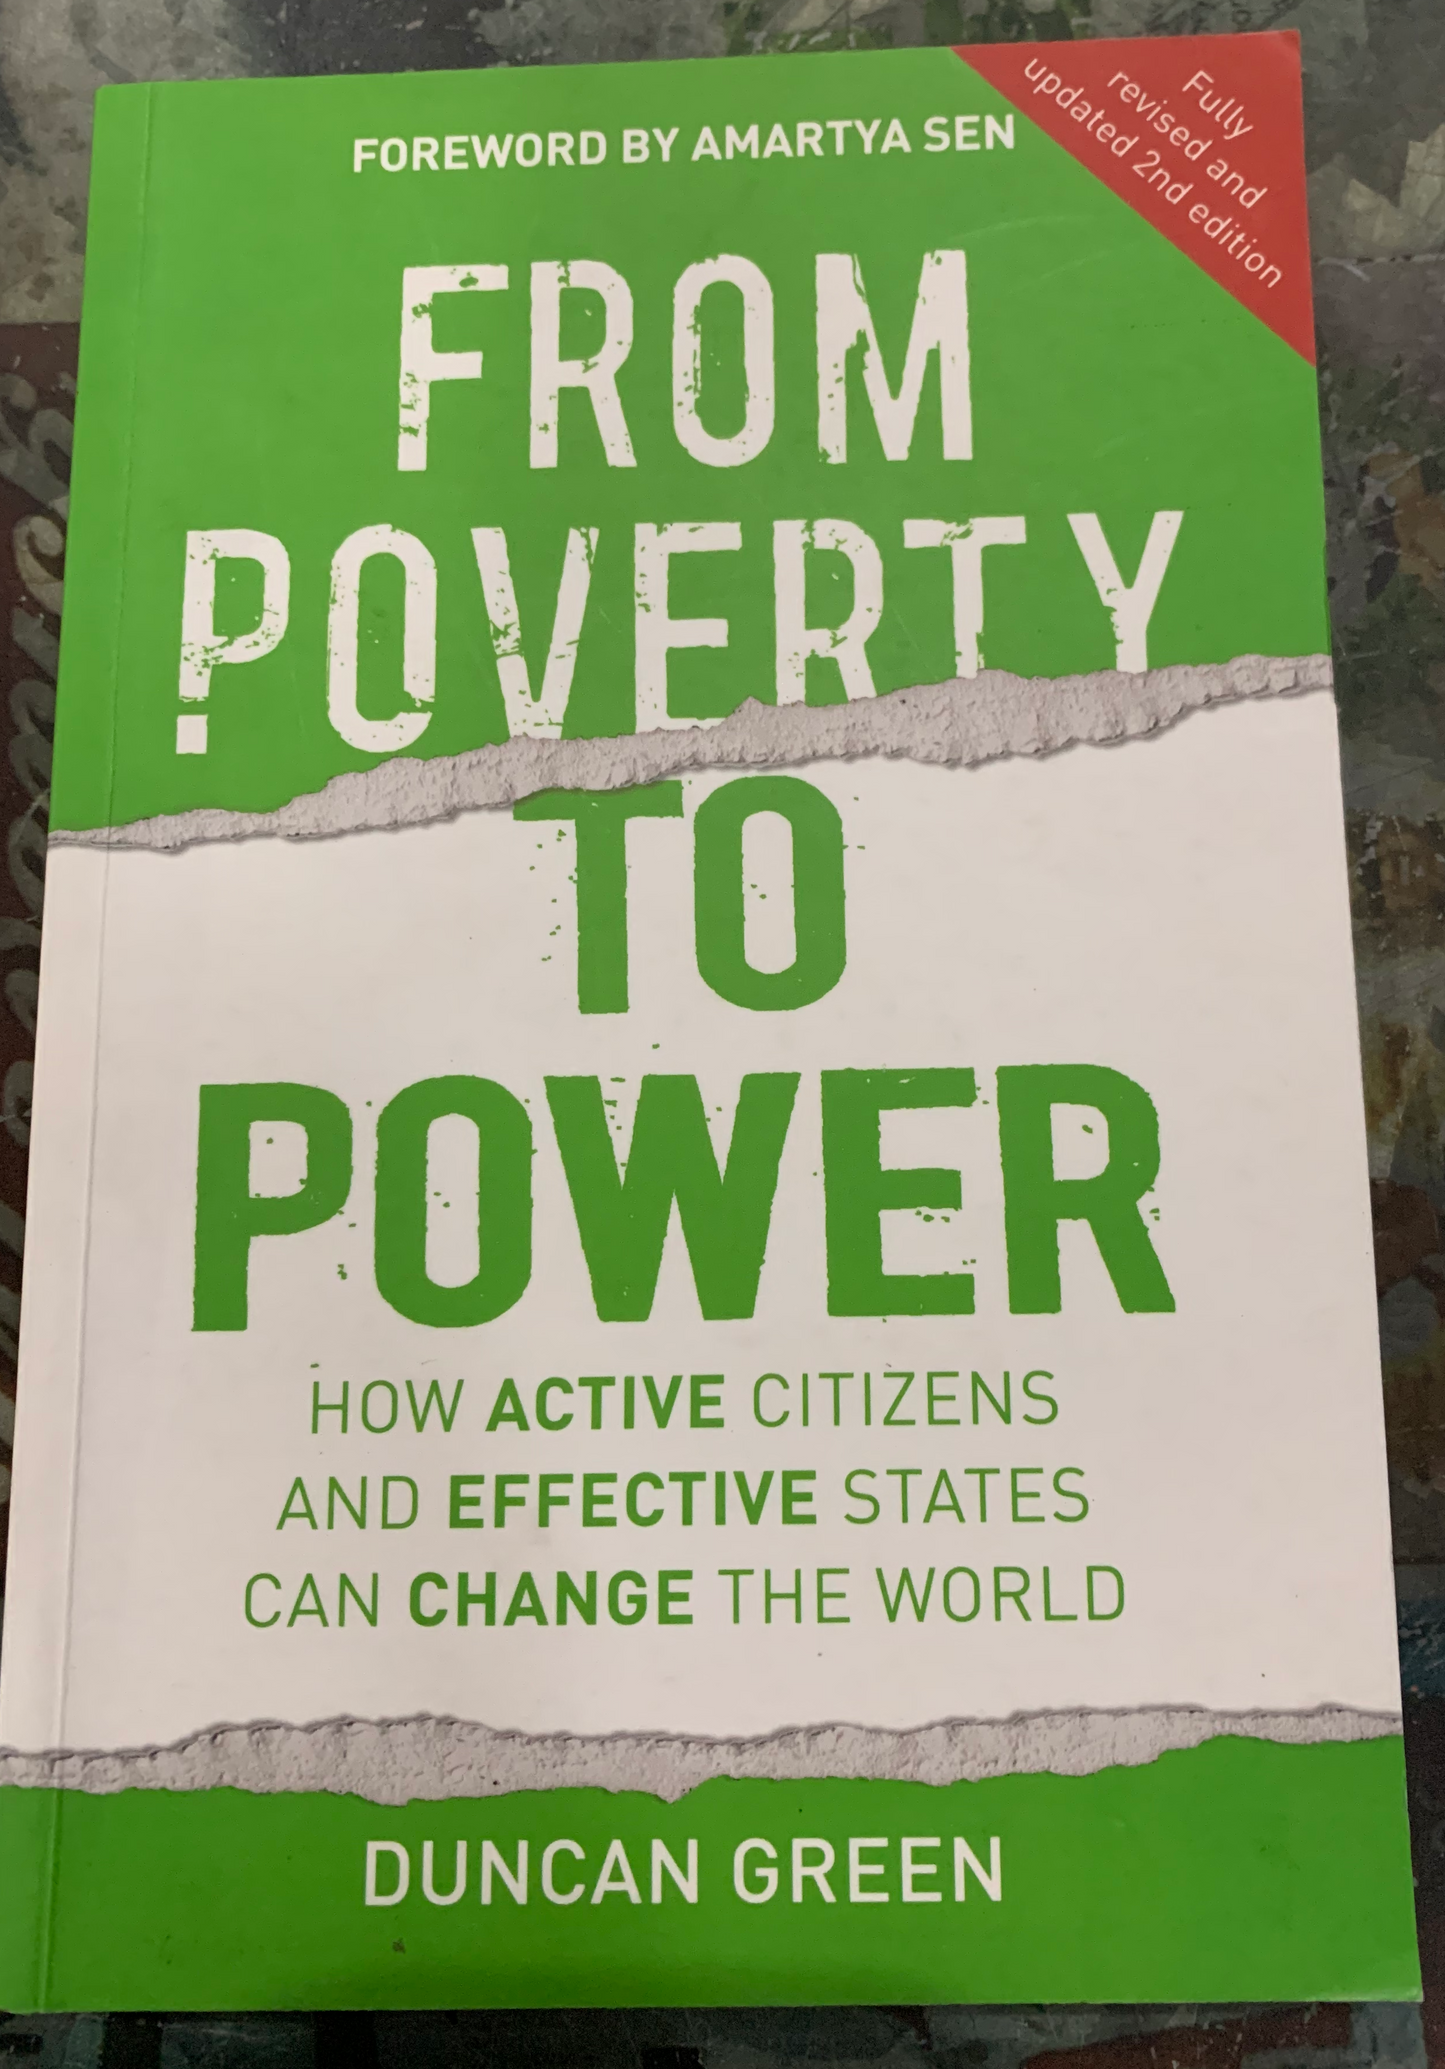 From poverty to power (2nd edition), by Duncan Green